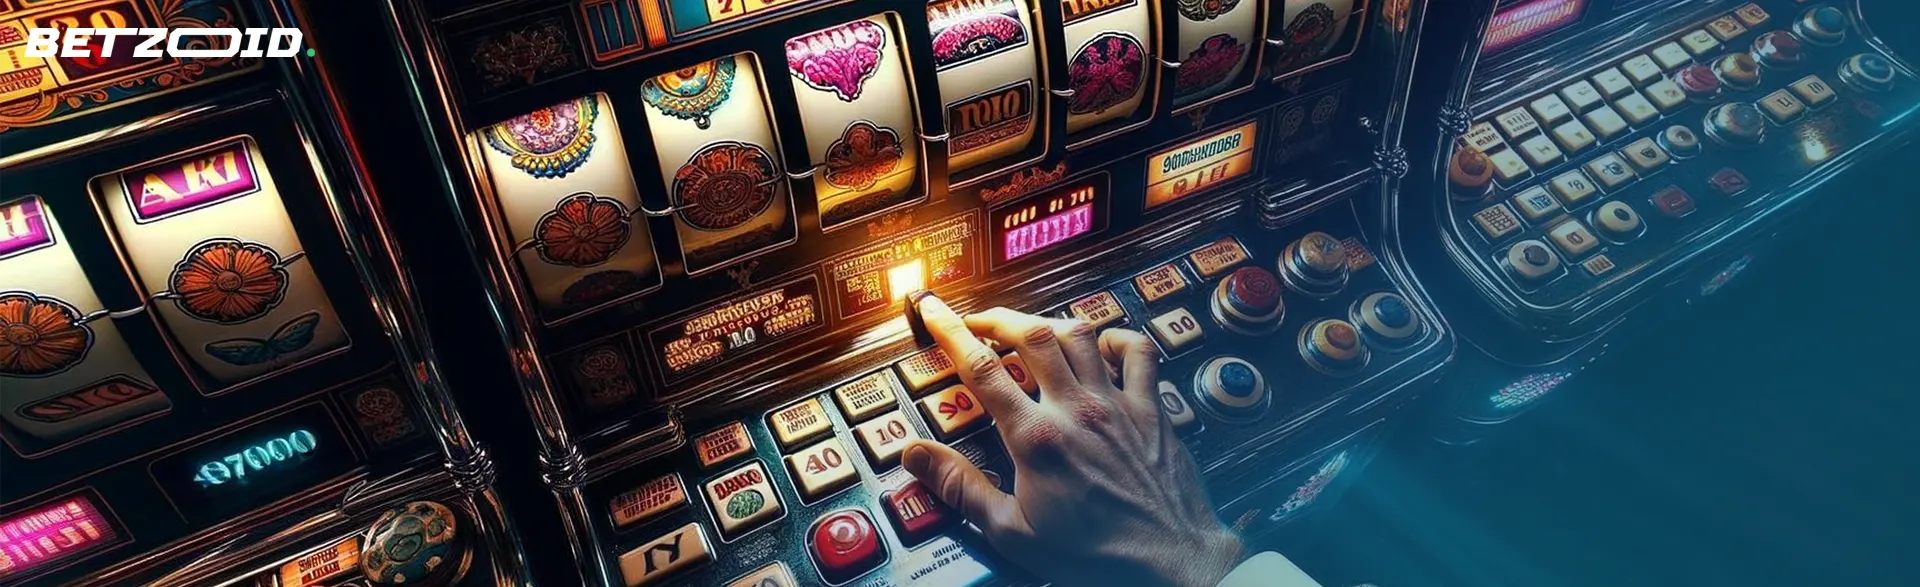 A gambler presses the button on a slot machine, a common feature in casinos with free spins.